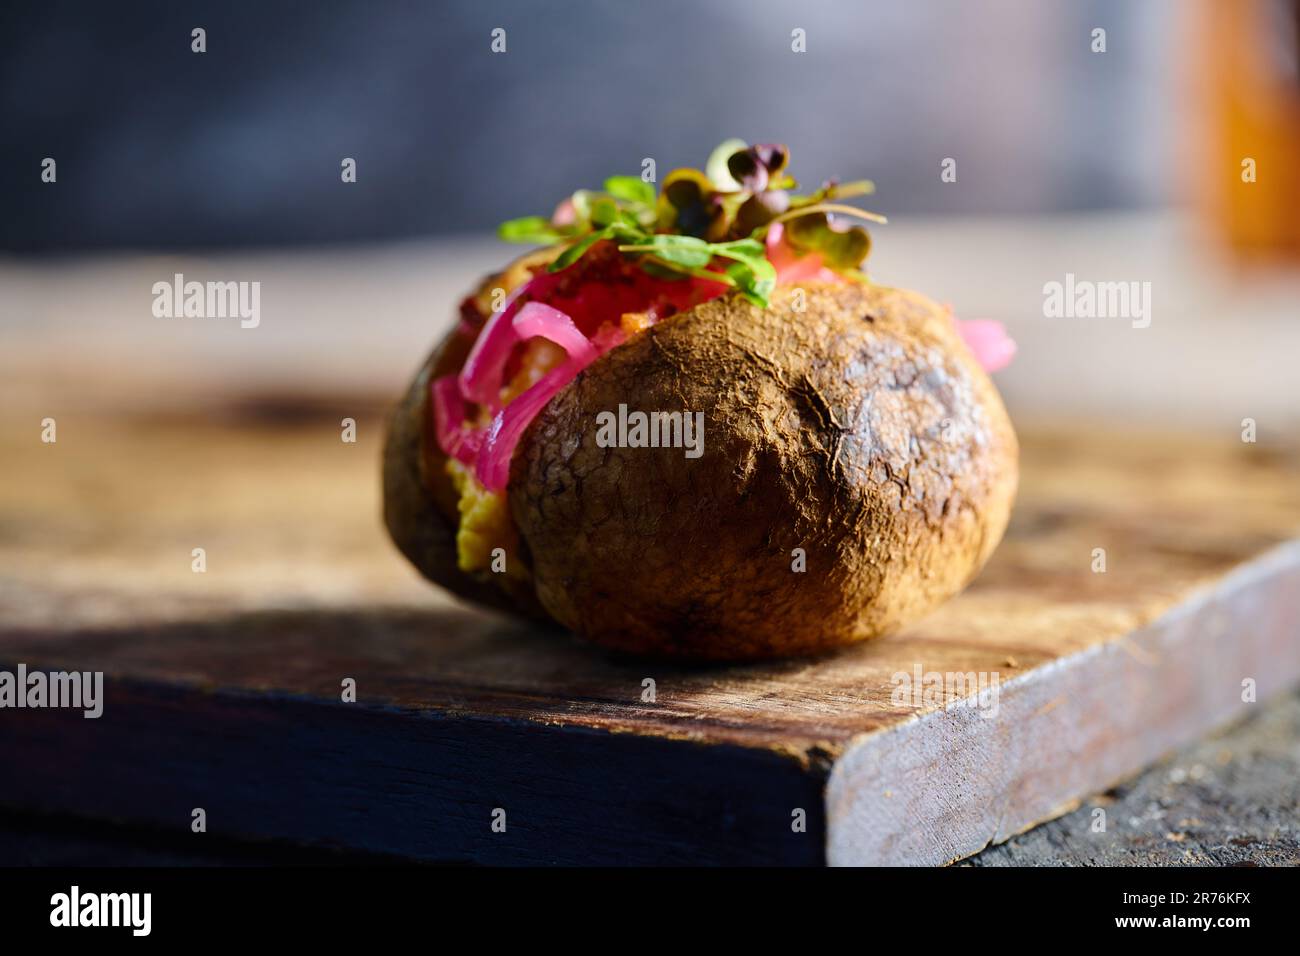 Appetizing traditional Ecuadorian kumpir potato with stuffing and herbs placed on wooden cutting board against blurred background Stock Photo